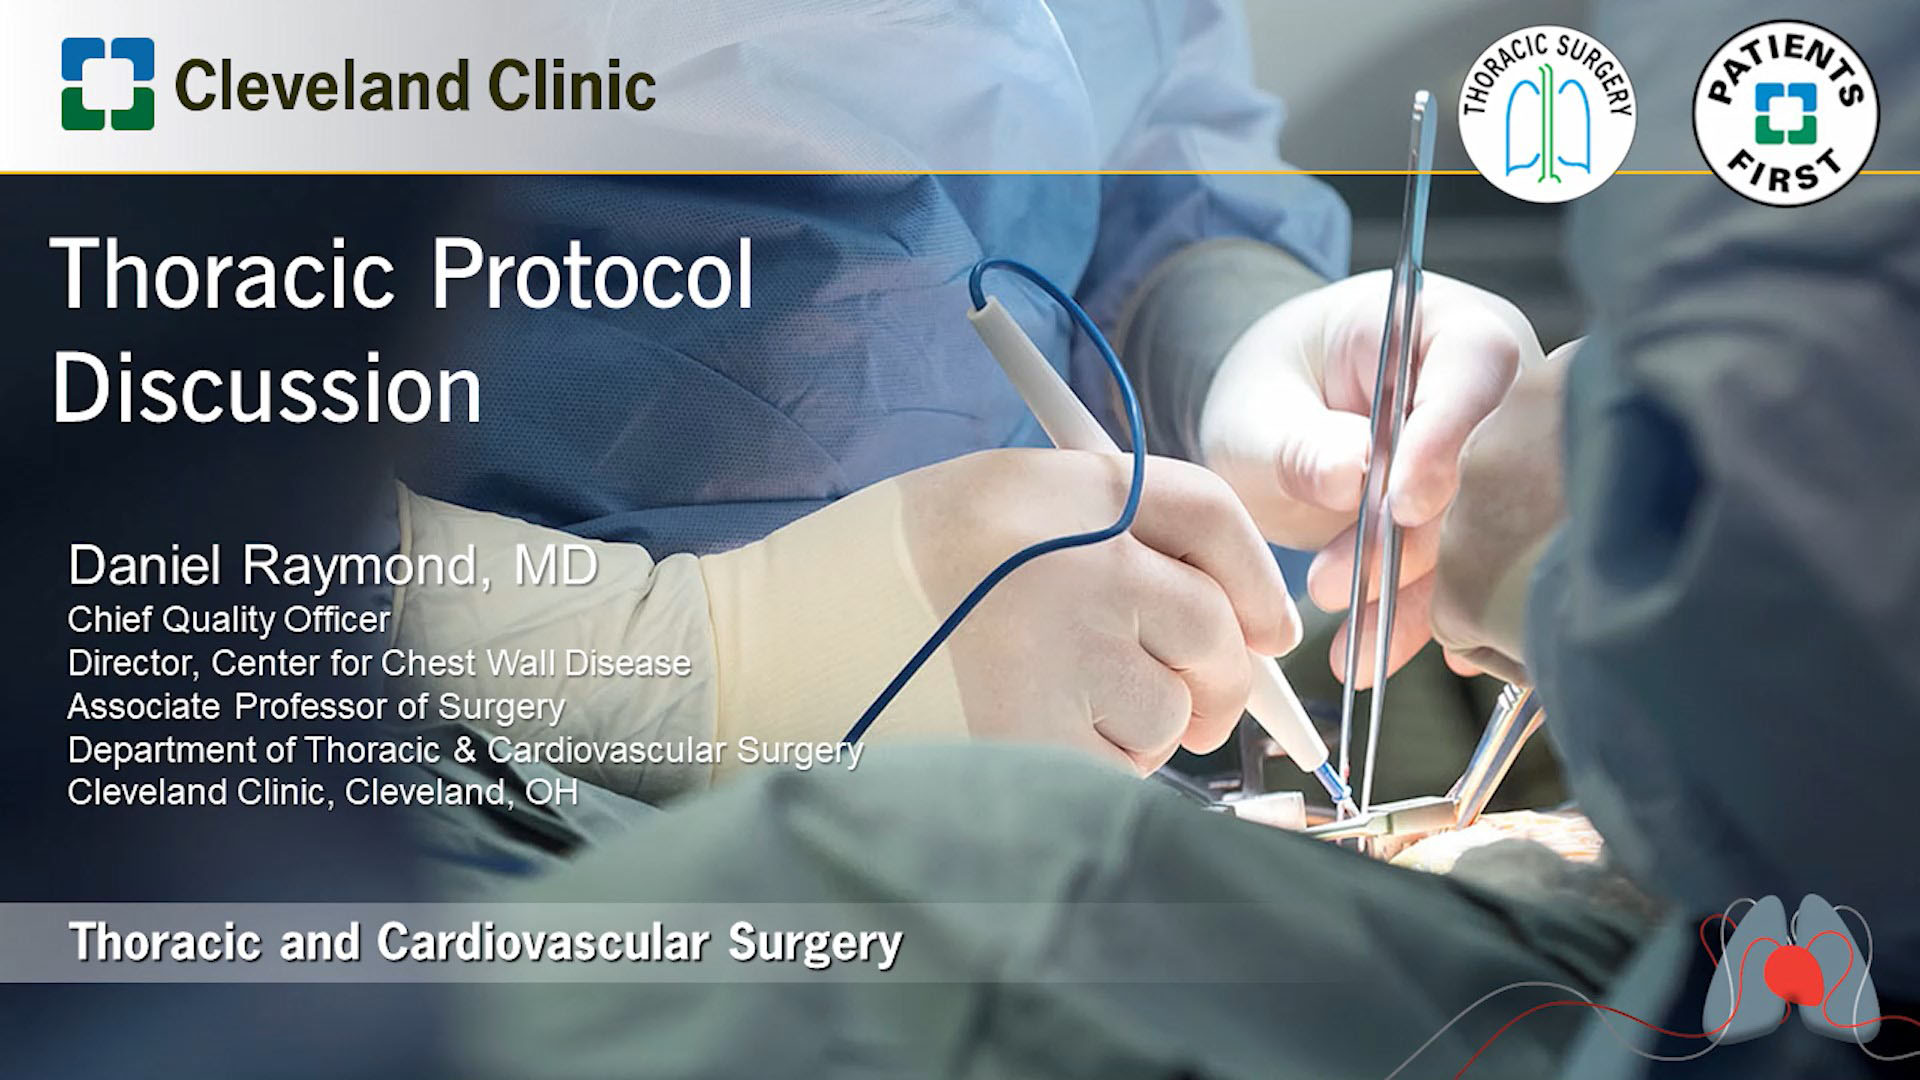 Cleveland Clinic Cardiac Consult | Daniel Raymond, MD | Thoracic Protocol Discussion